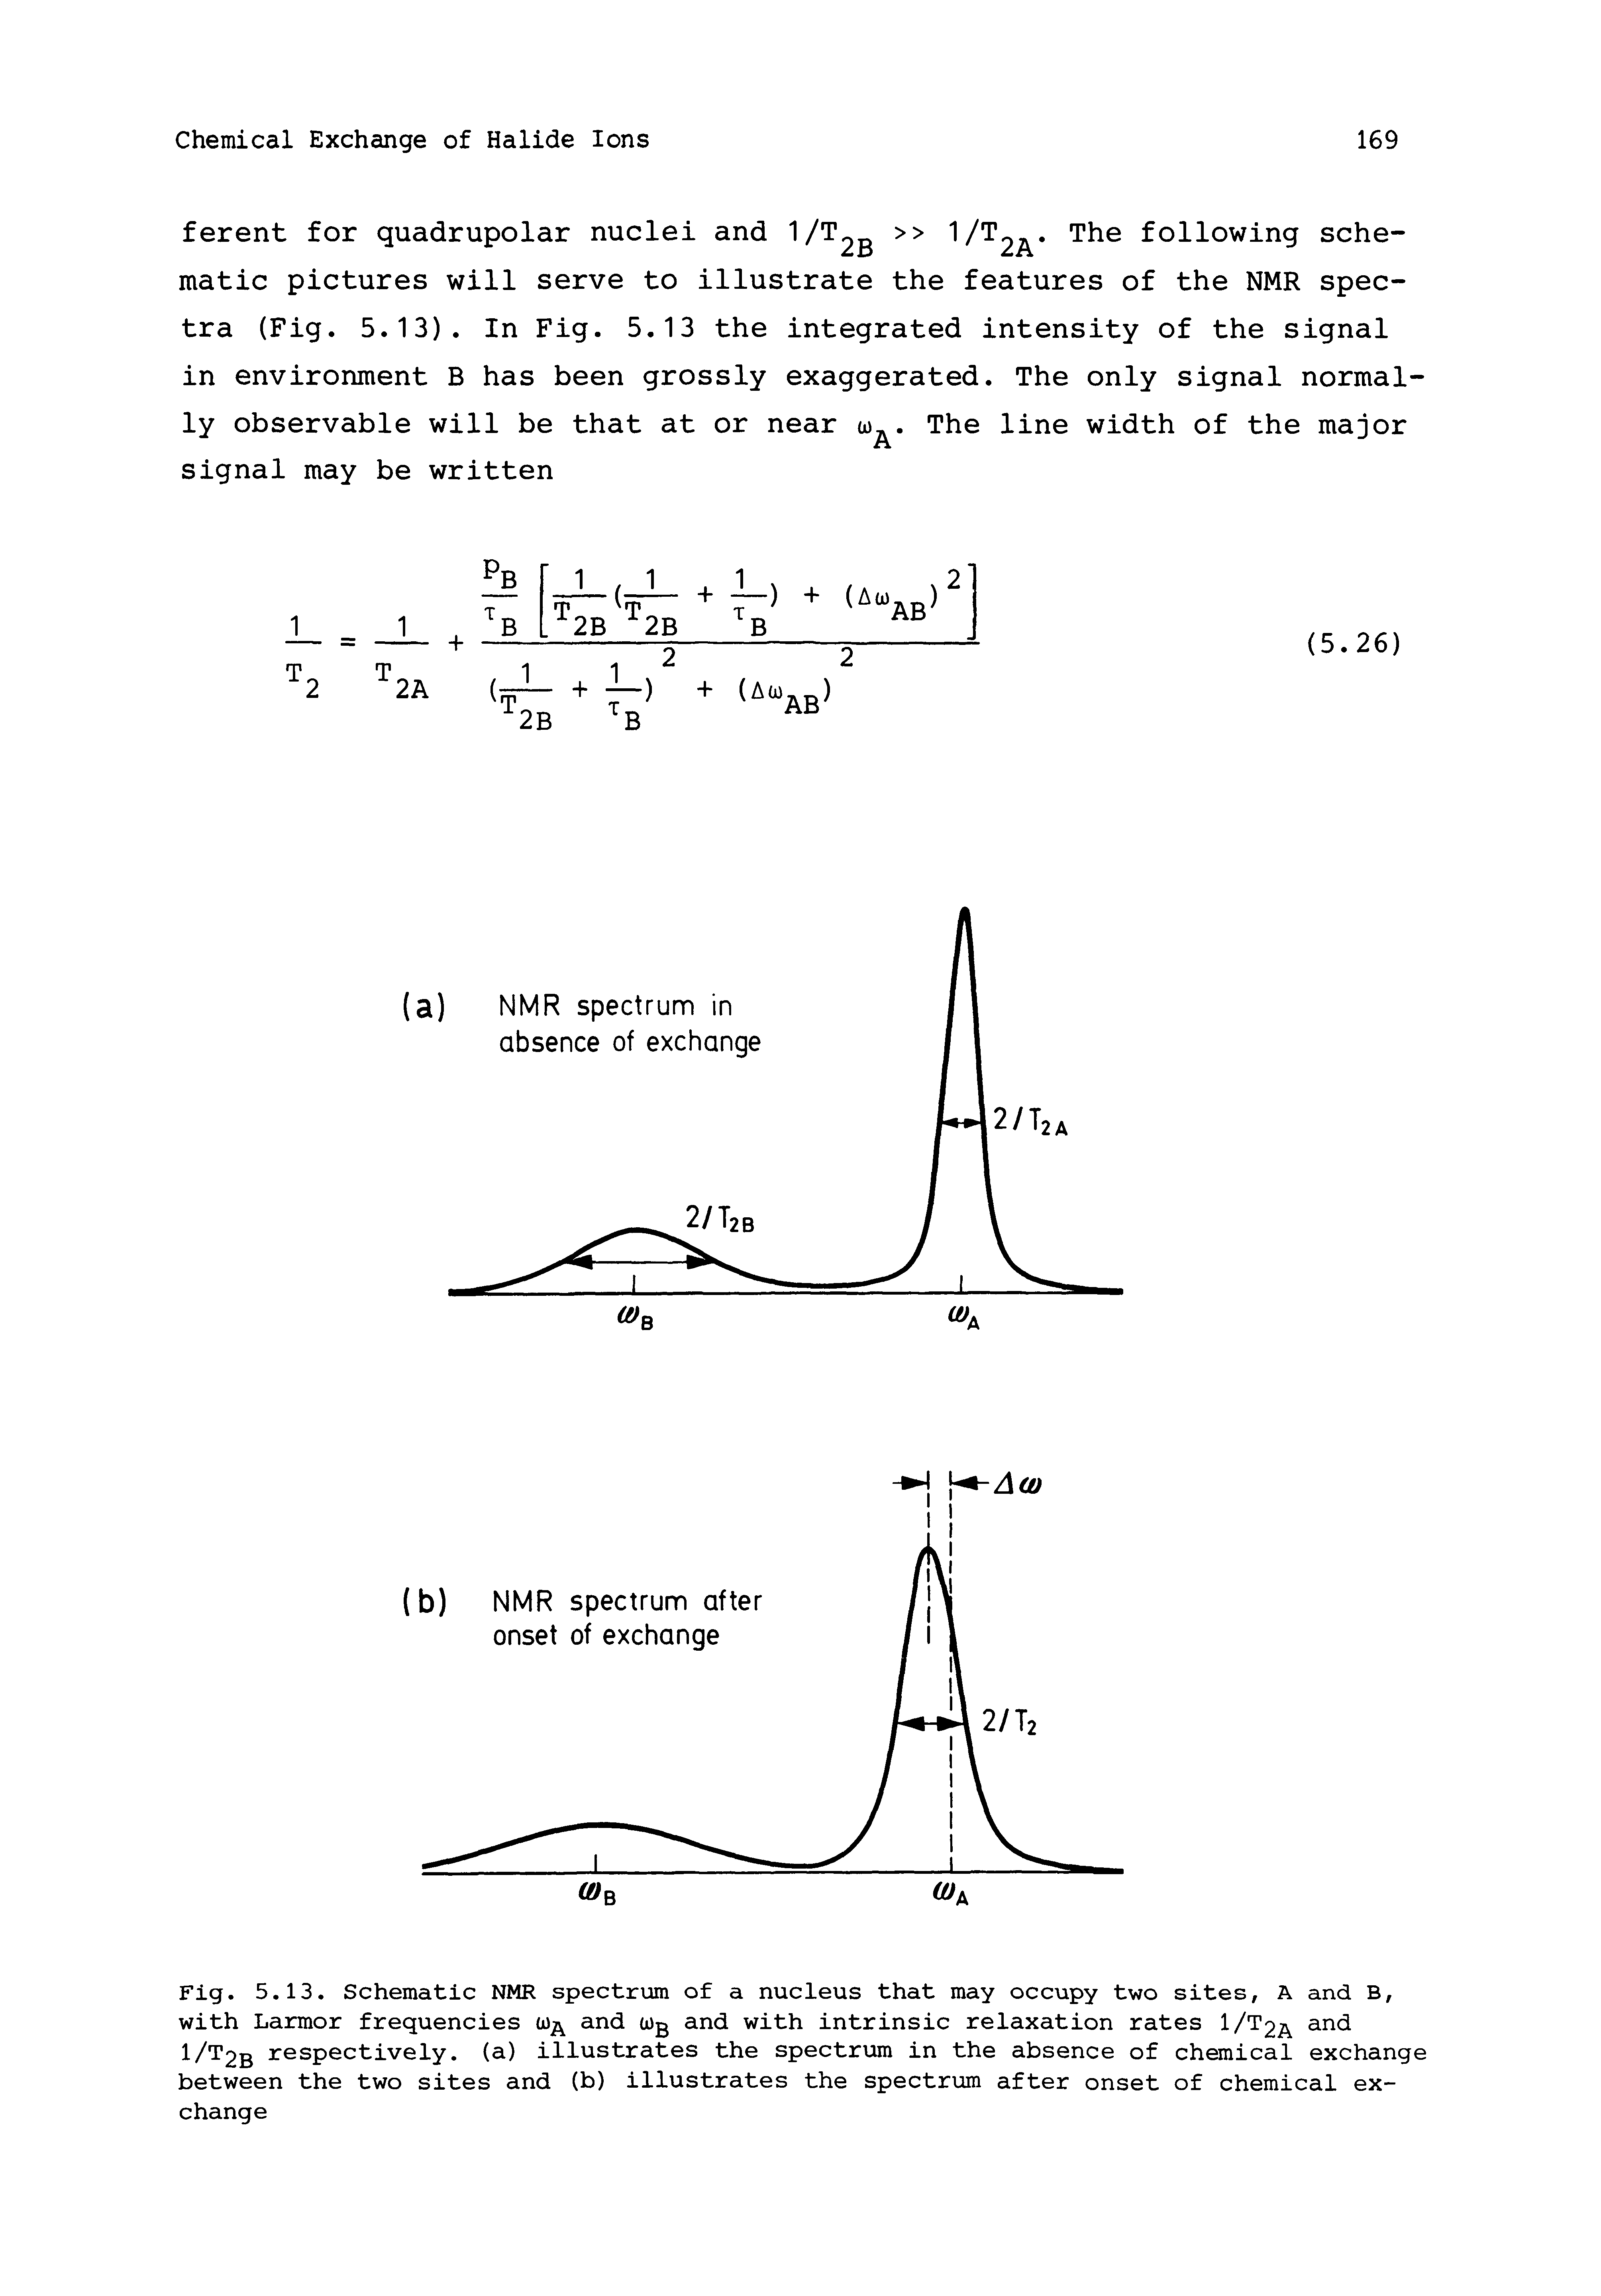 Fig. 5.13. Schematic NMR spectrum of a nucleus that may occupy two sites, A and B, with Larmor frequencies and Wg and with intrinsic relaxation rates I/T2A 1/T2b respectively, (a) illustrates the spectrum in the absence of chemical exchange between the two sites and (b) illustrates the spectrum after onset of chemical exchange...